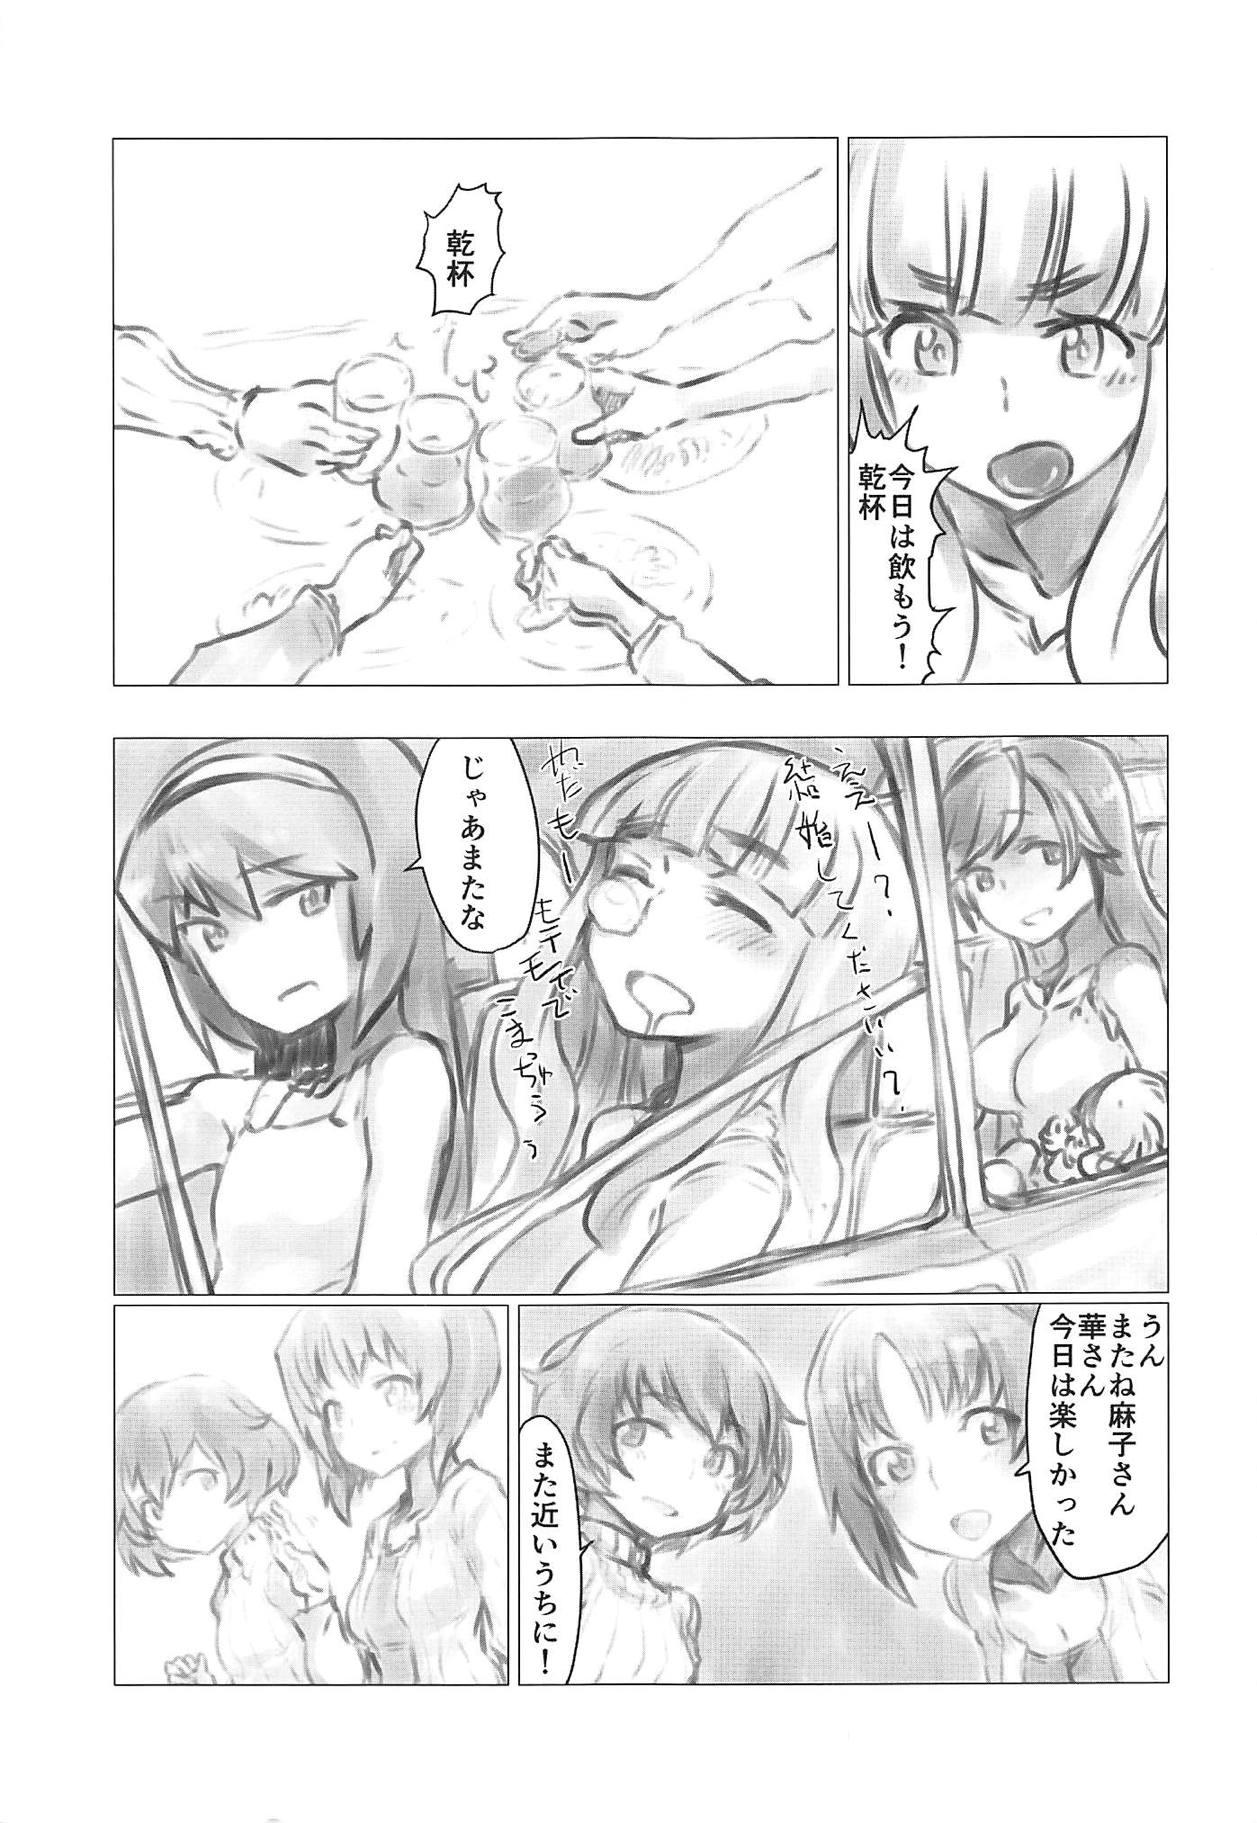 Putas THE DOG MAY STAND THE STRONG INSTEAD - Girls und panzer From - Page 4